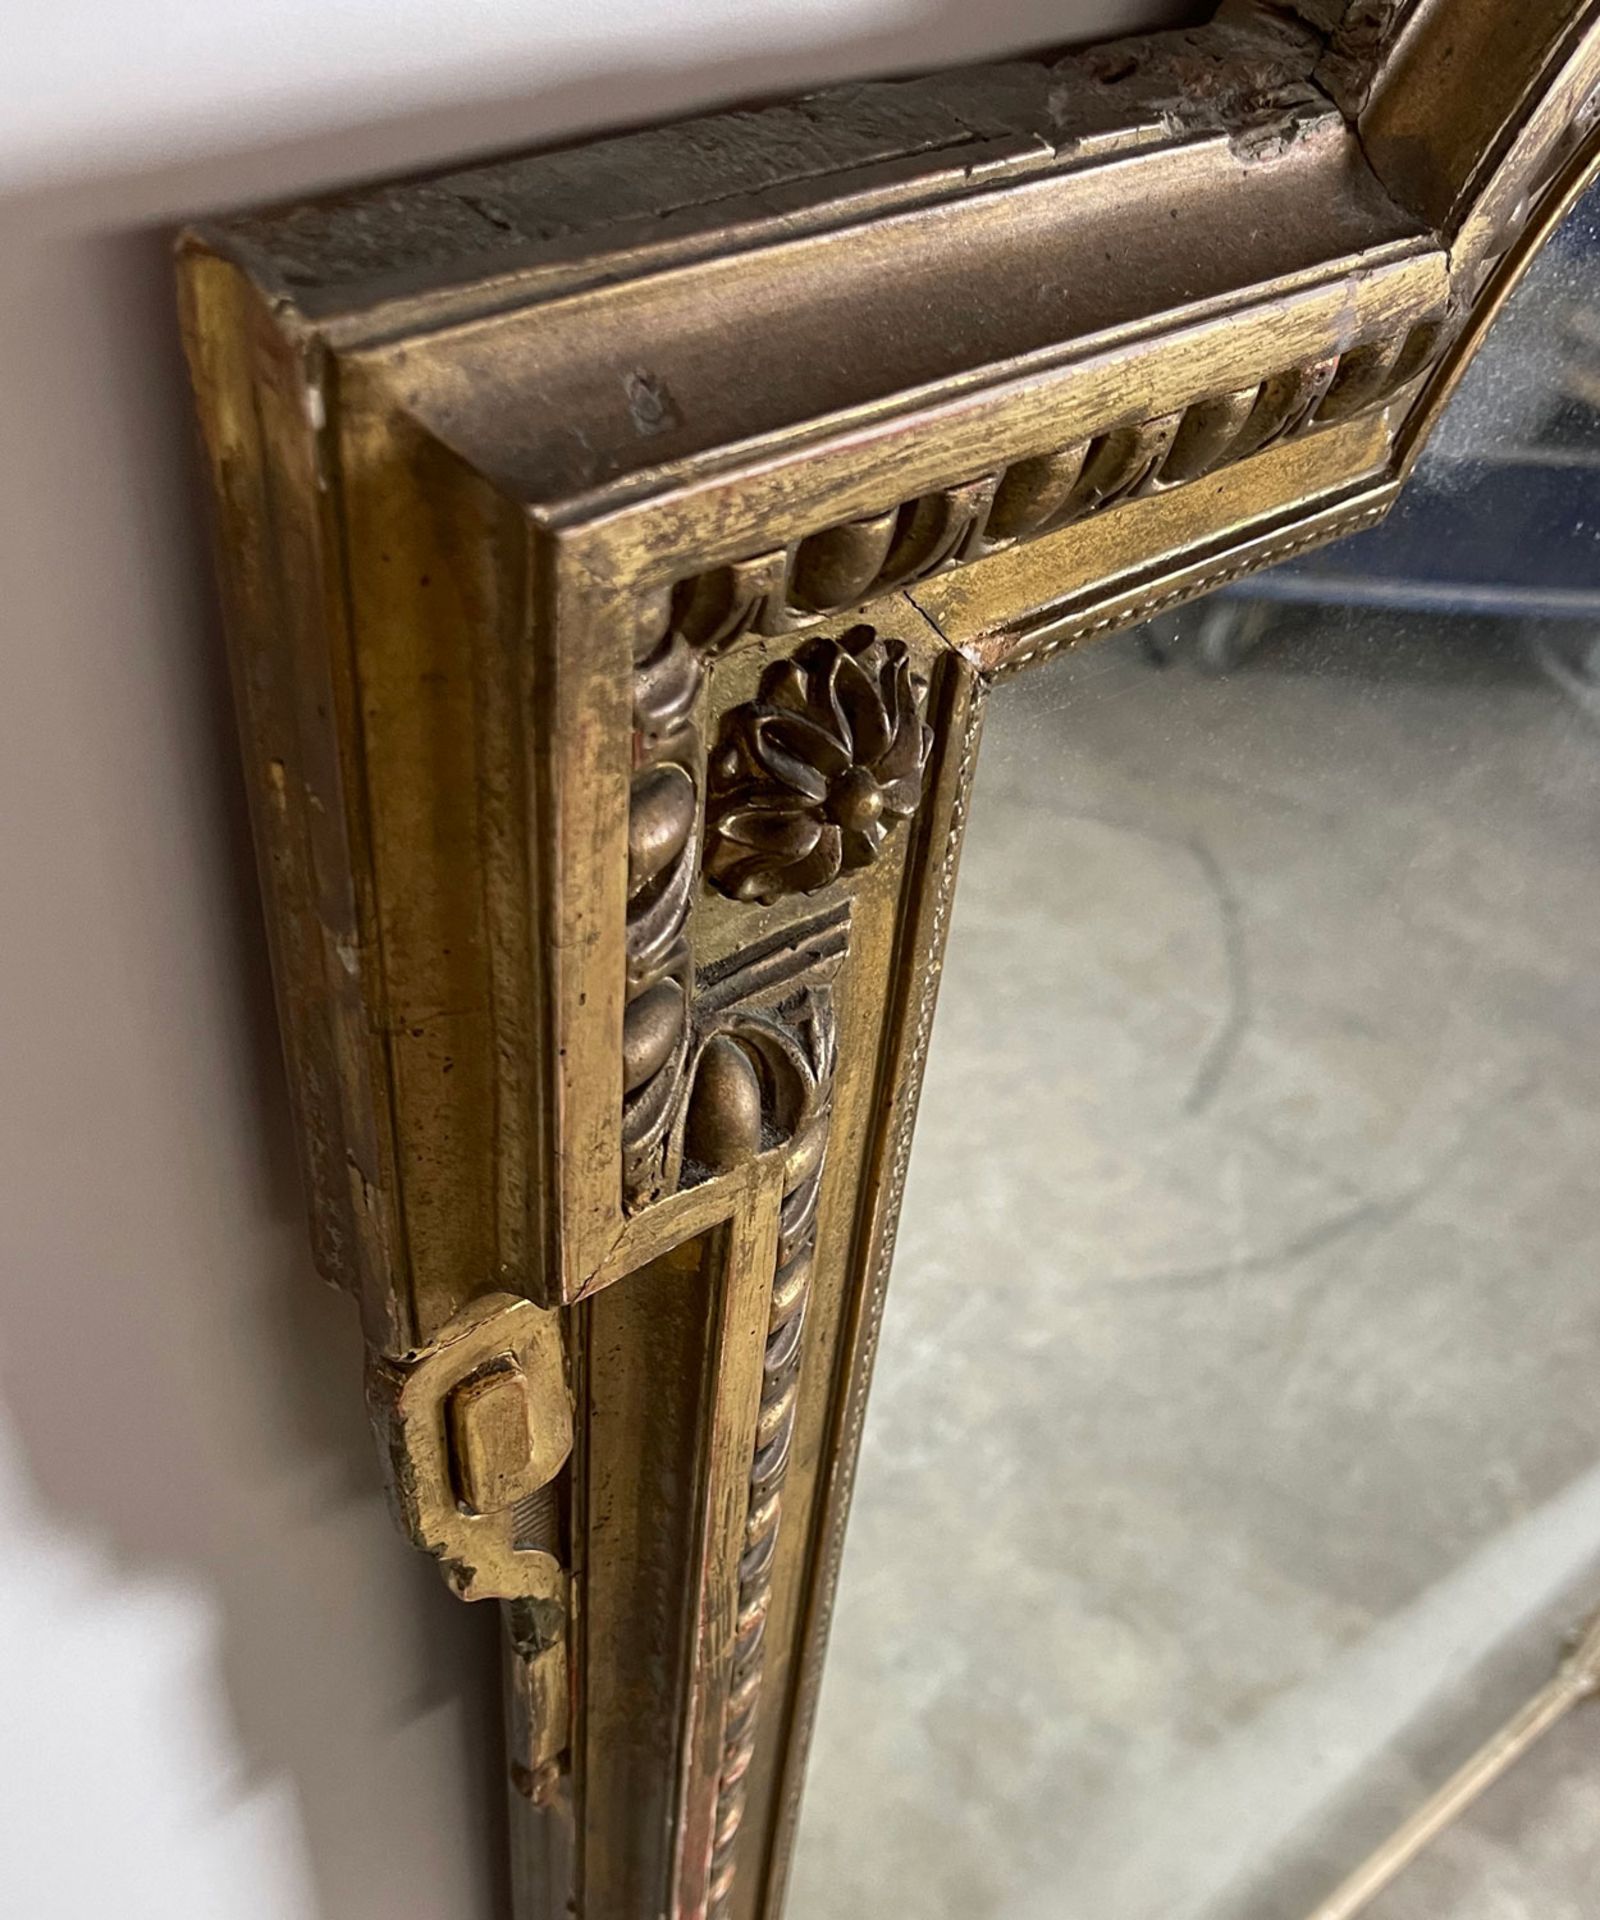 Large Antique Castle Mirror with Gilded Wooden Frame - Image 6 of 13